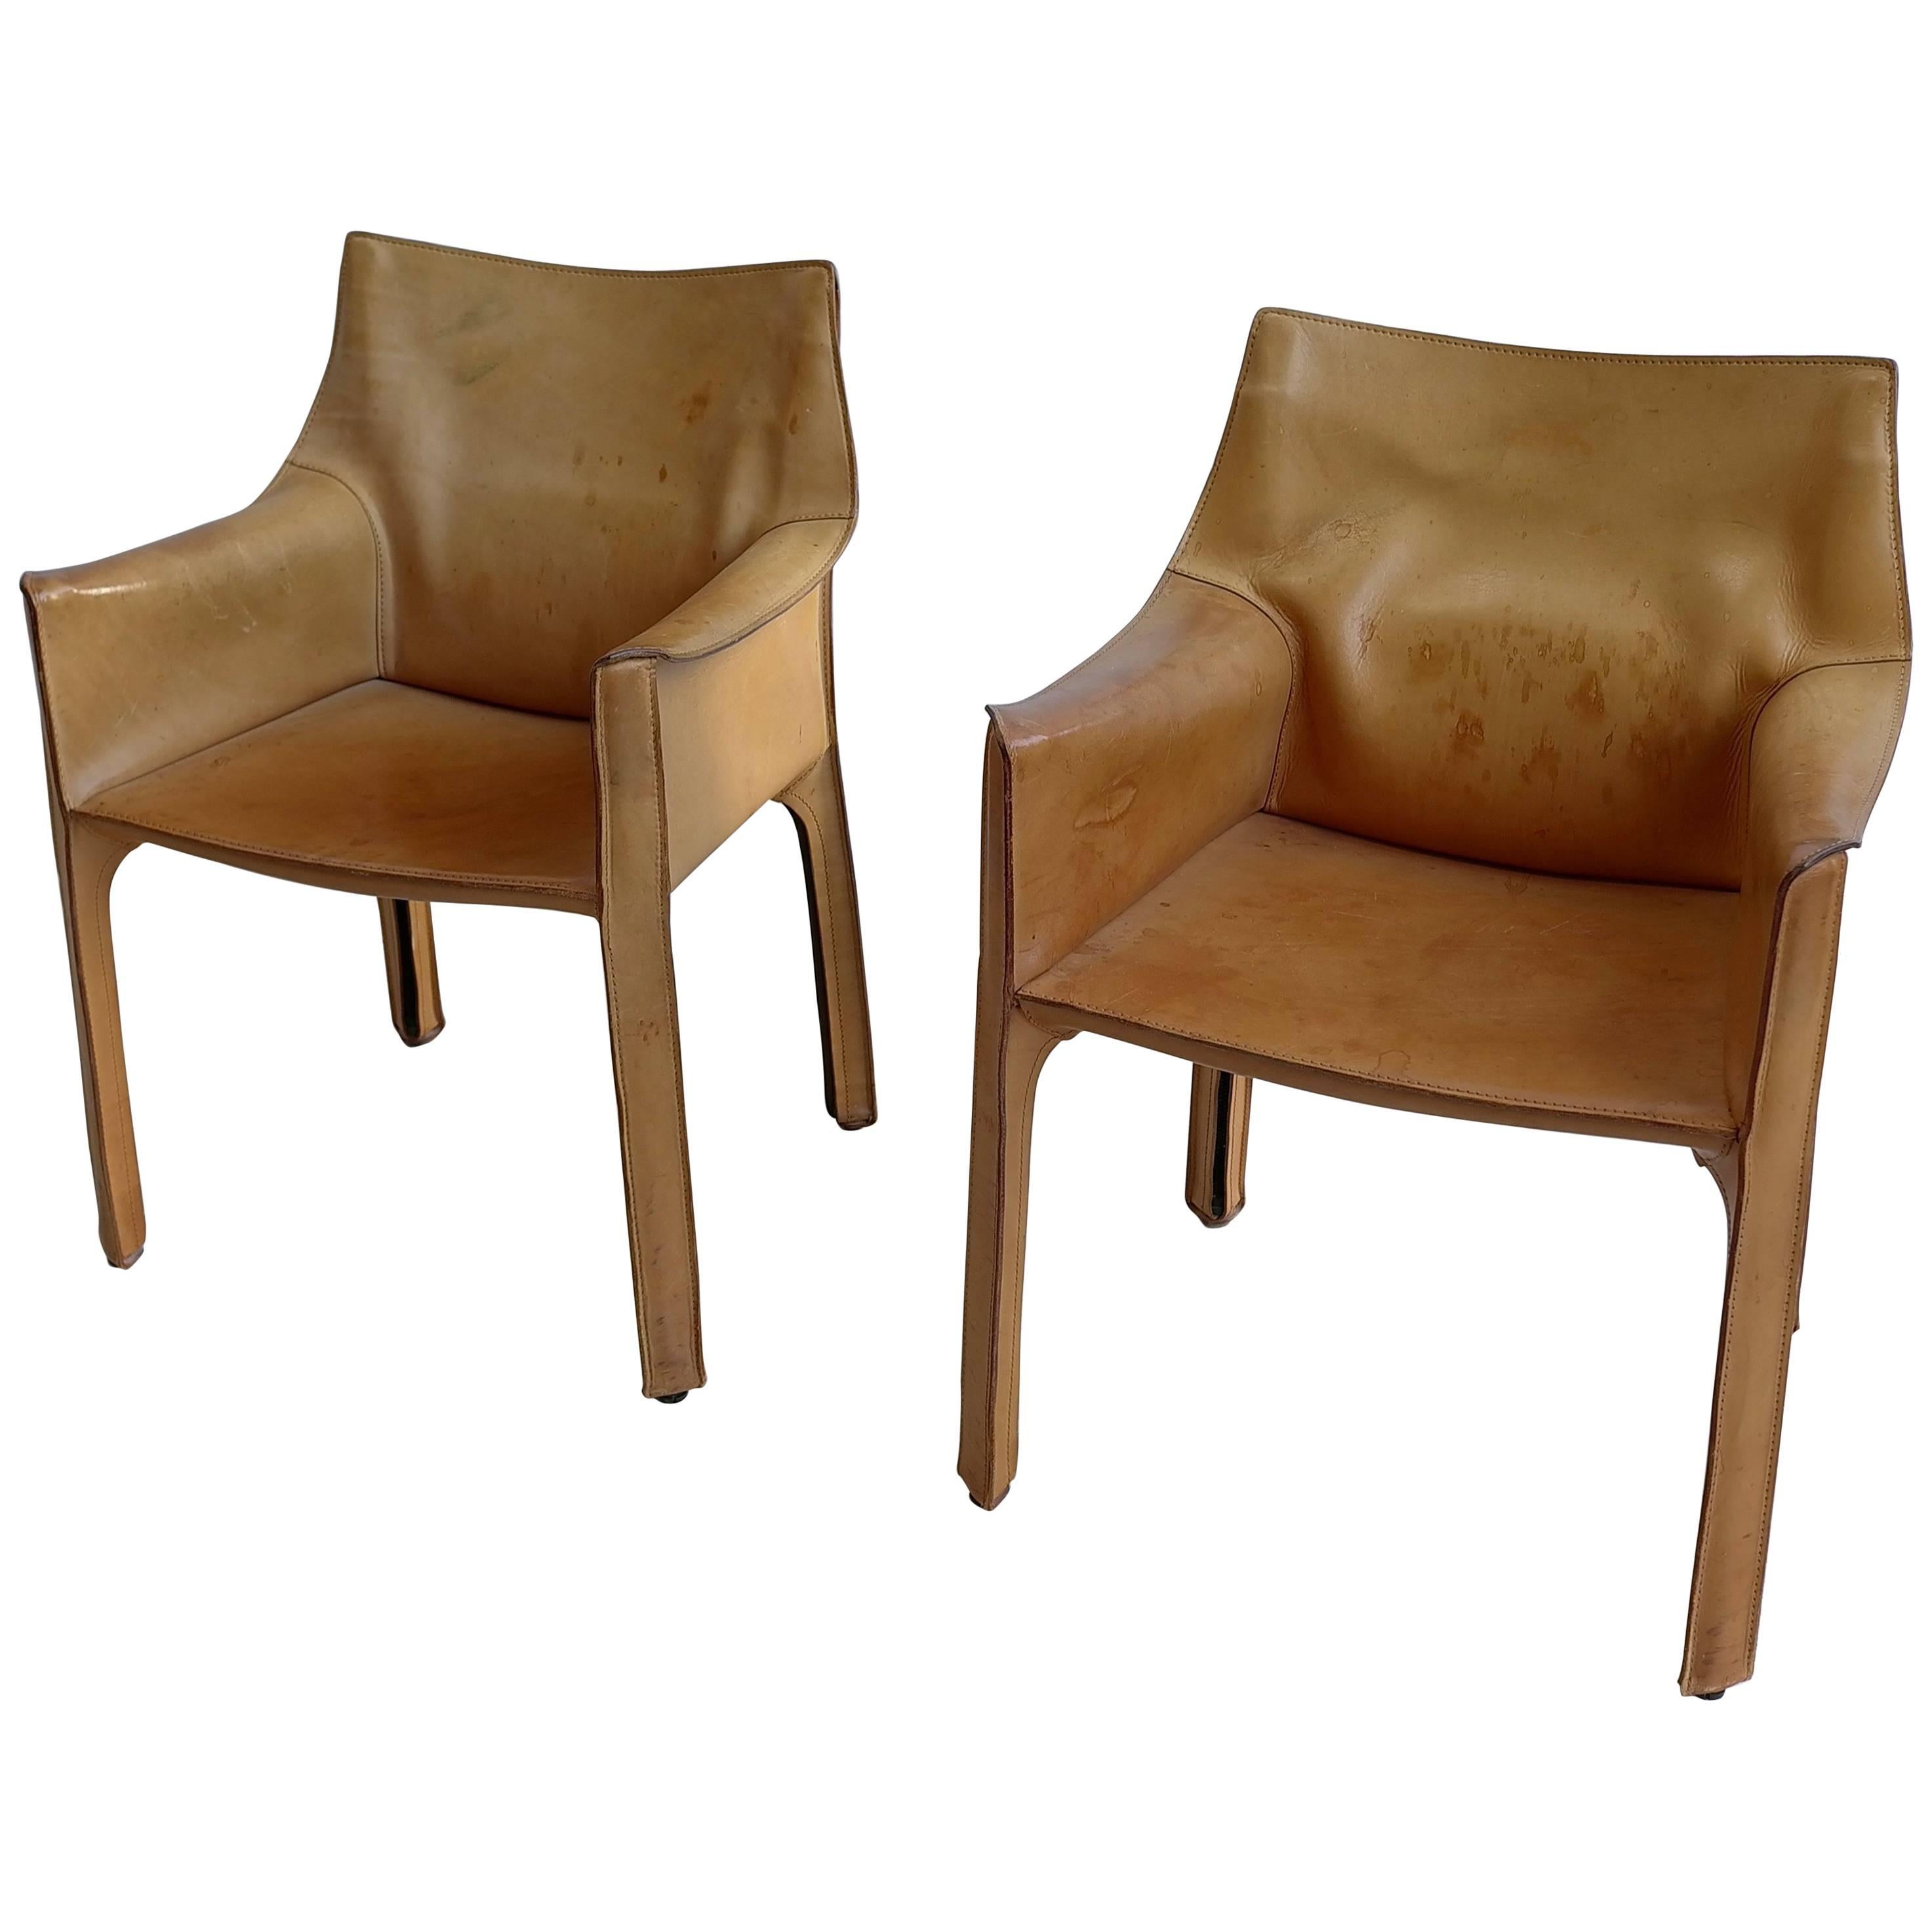 Pair of Mario Bellini Cab Chairs in Natural Leather by Cassina Italy